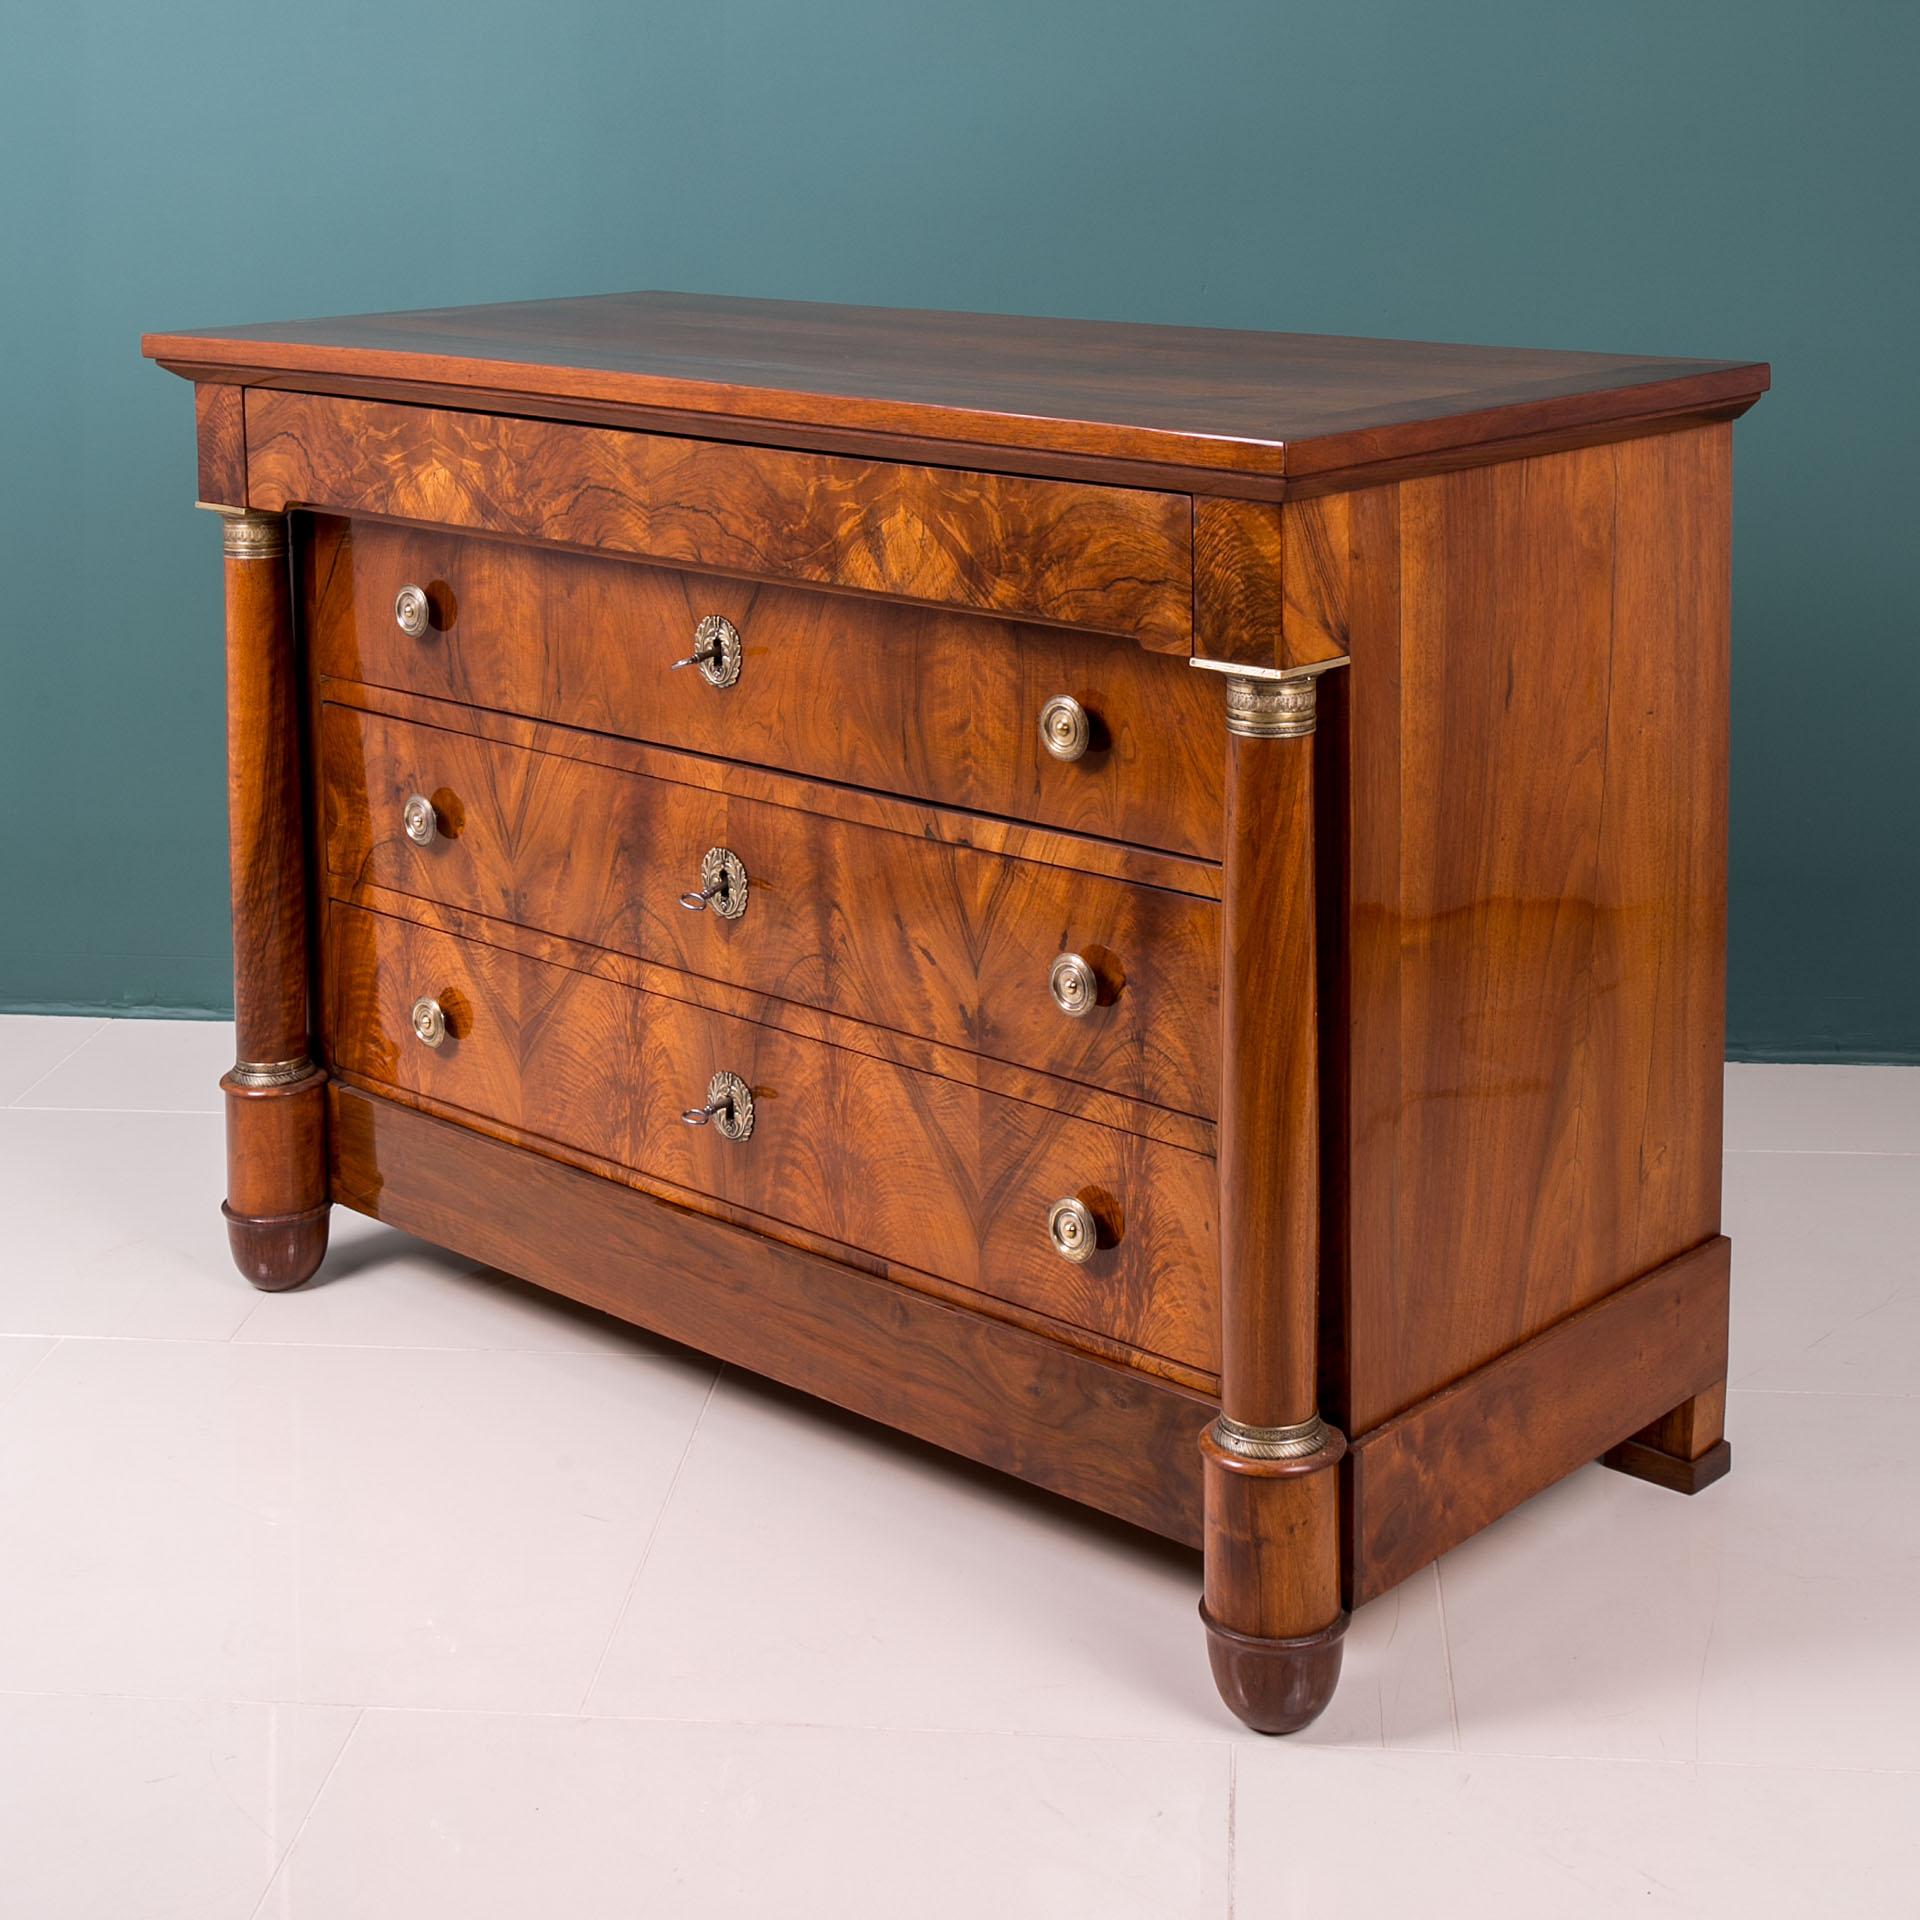 Polished Biedermeier Chest of Drawers, France, 19th Century